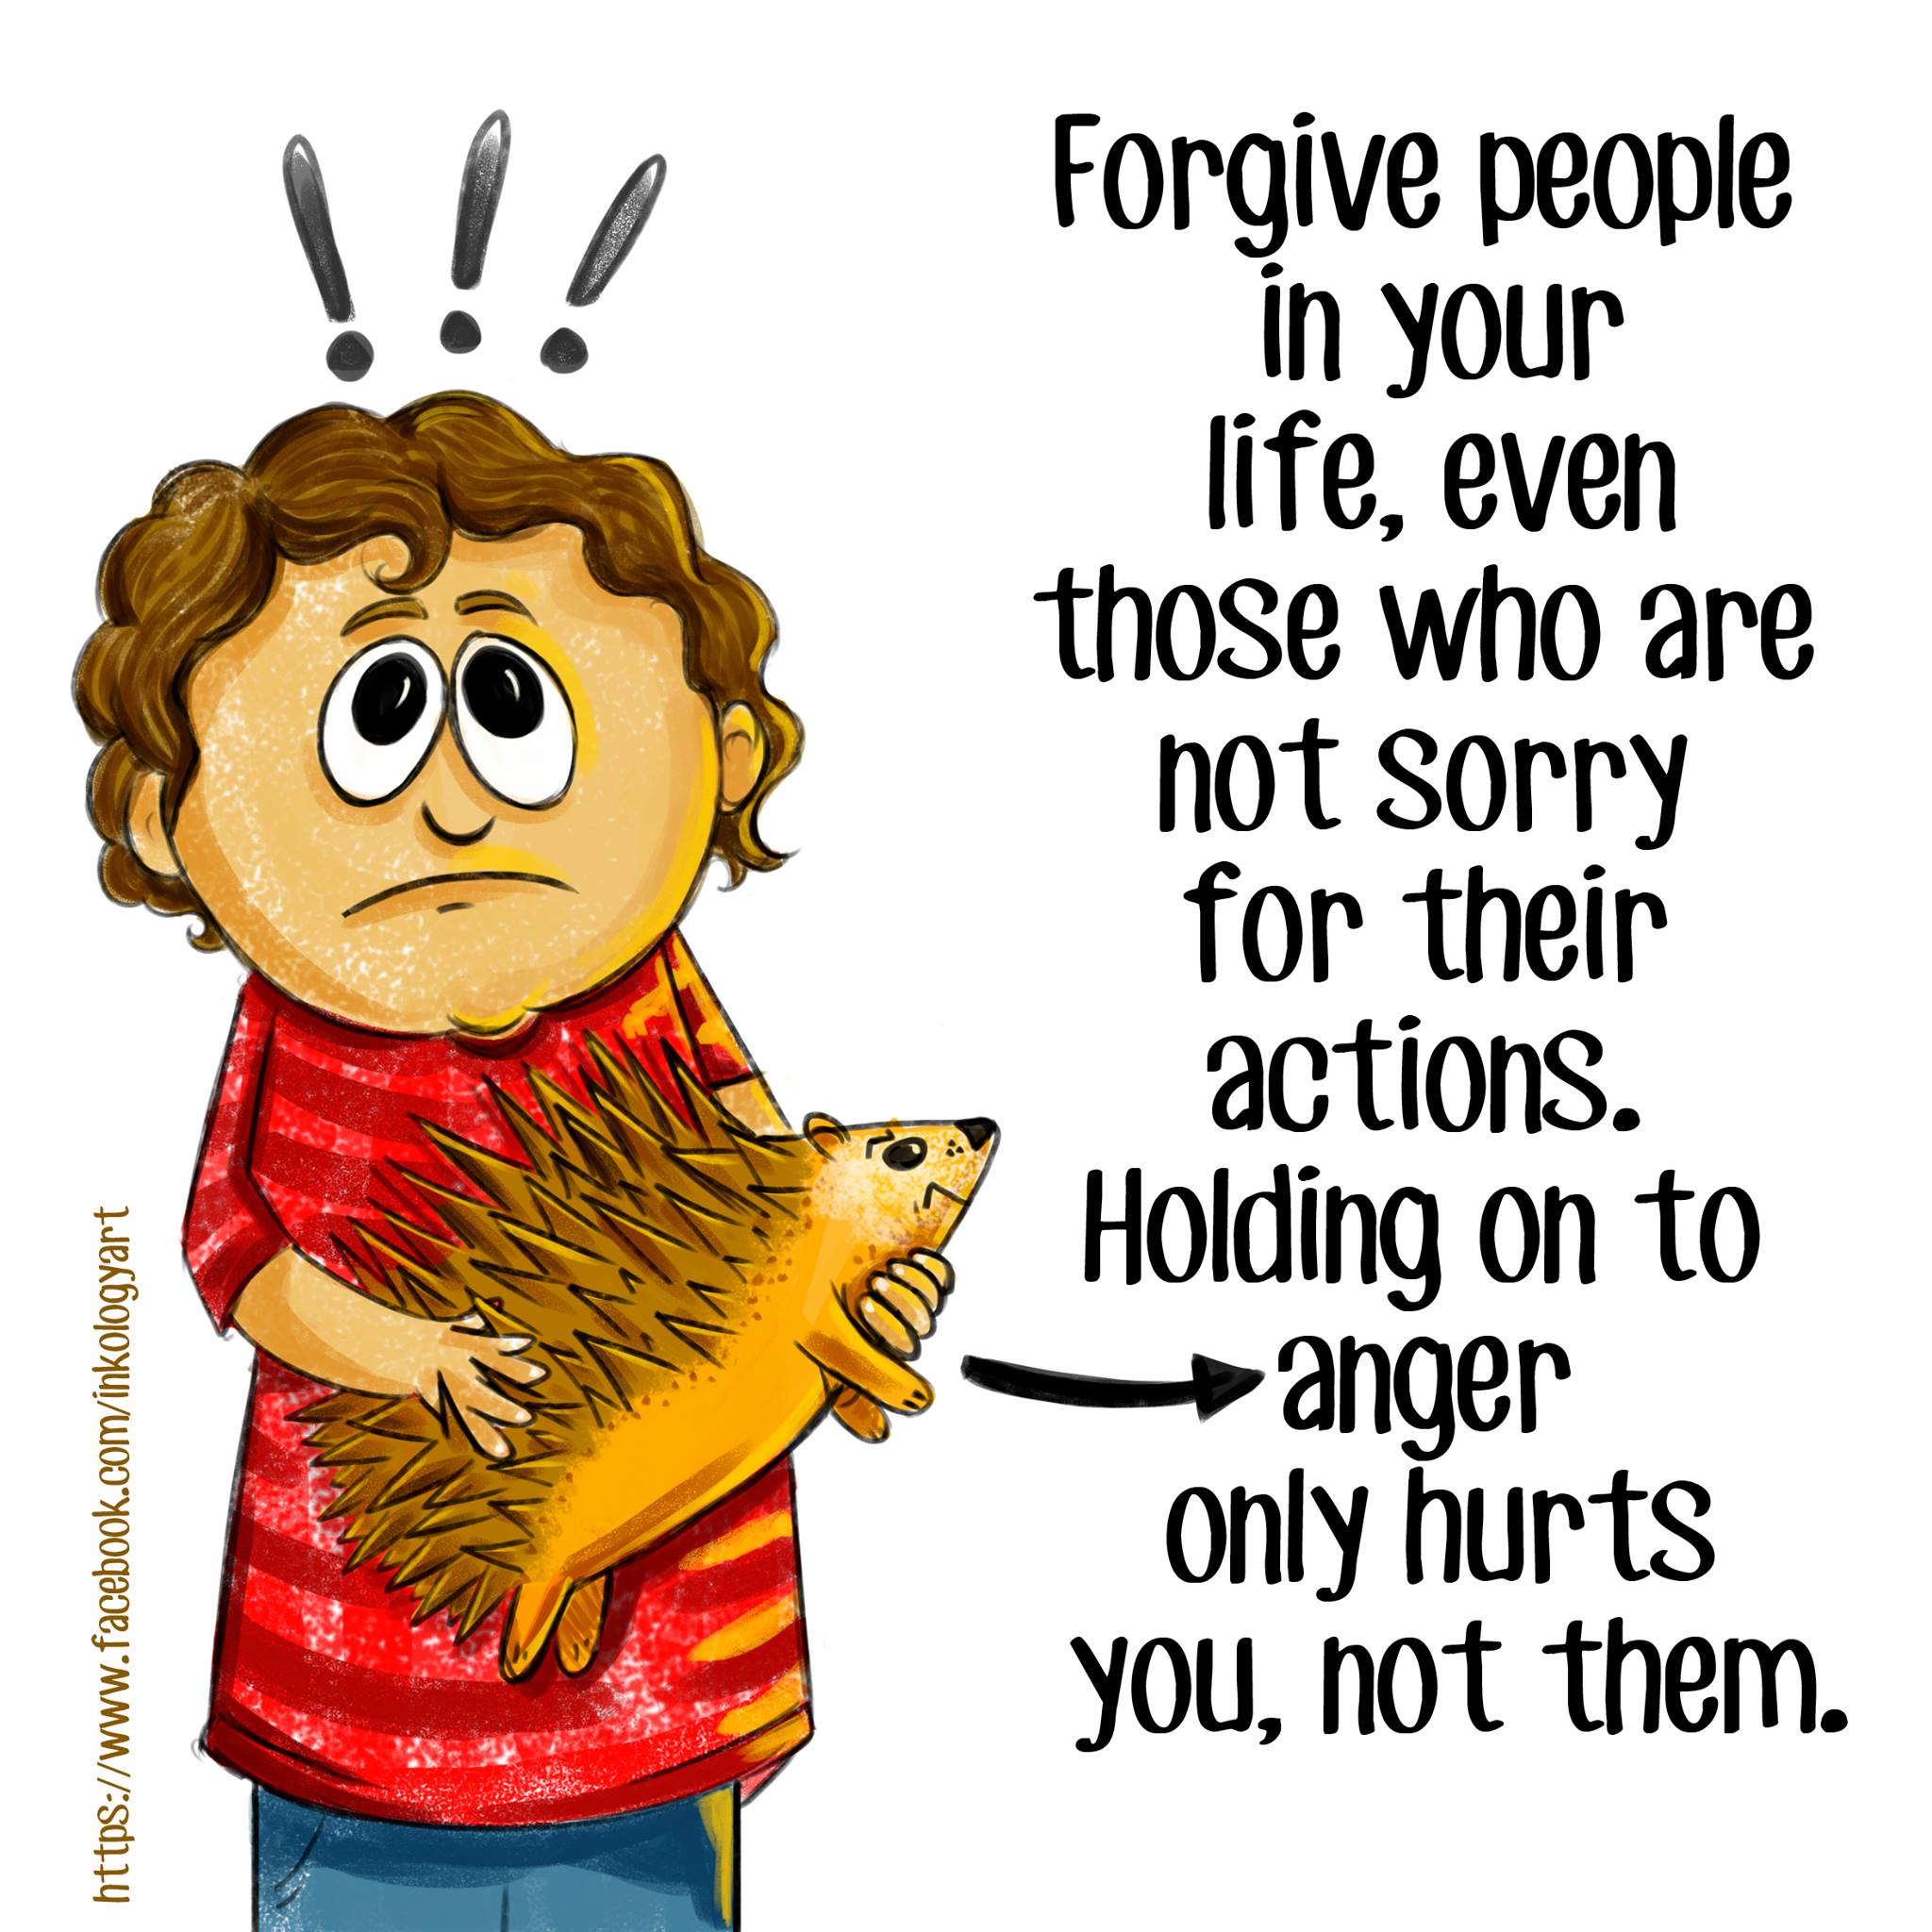 "Forgive people in your life, even those who are not sorry for their actions. Holding onto anger only hurts you, not them." A quote by Inkology Art